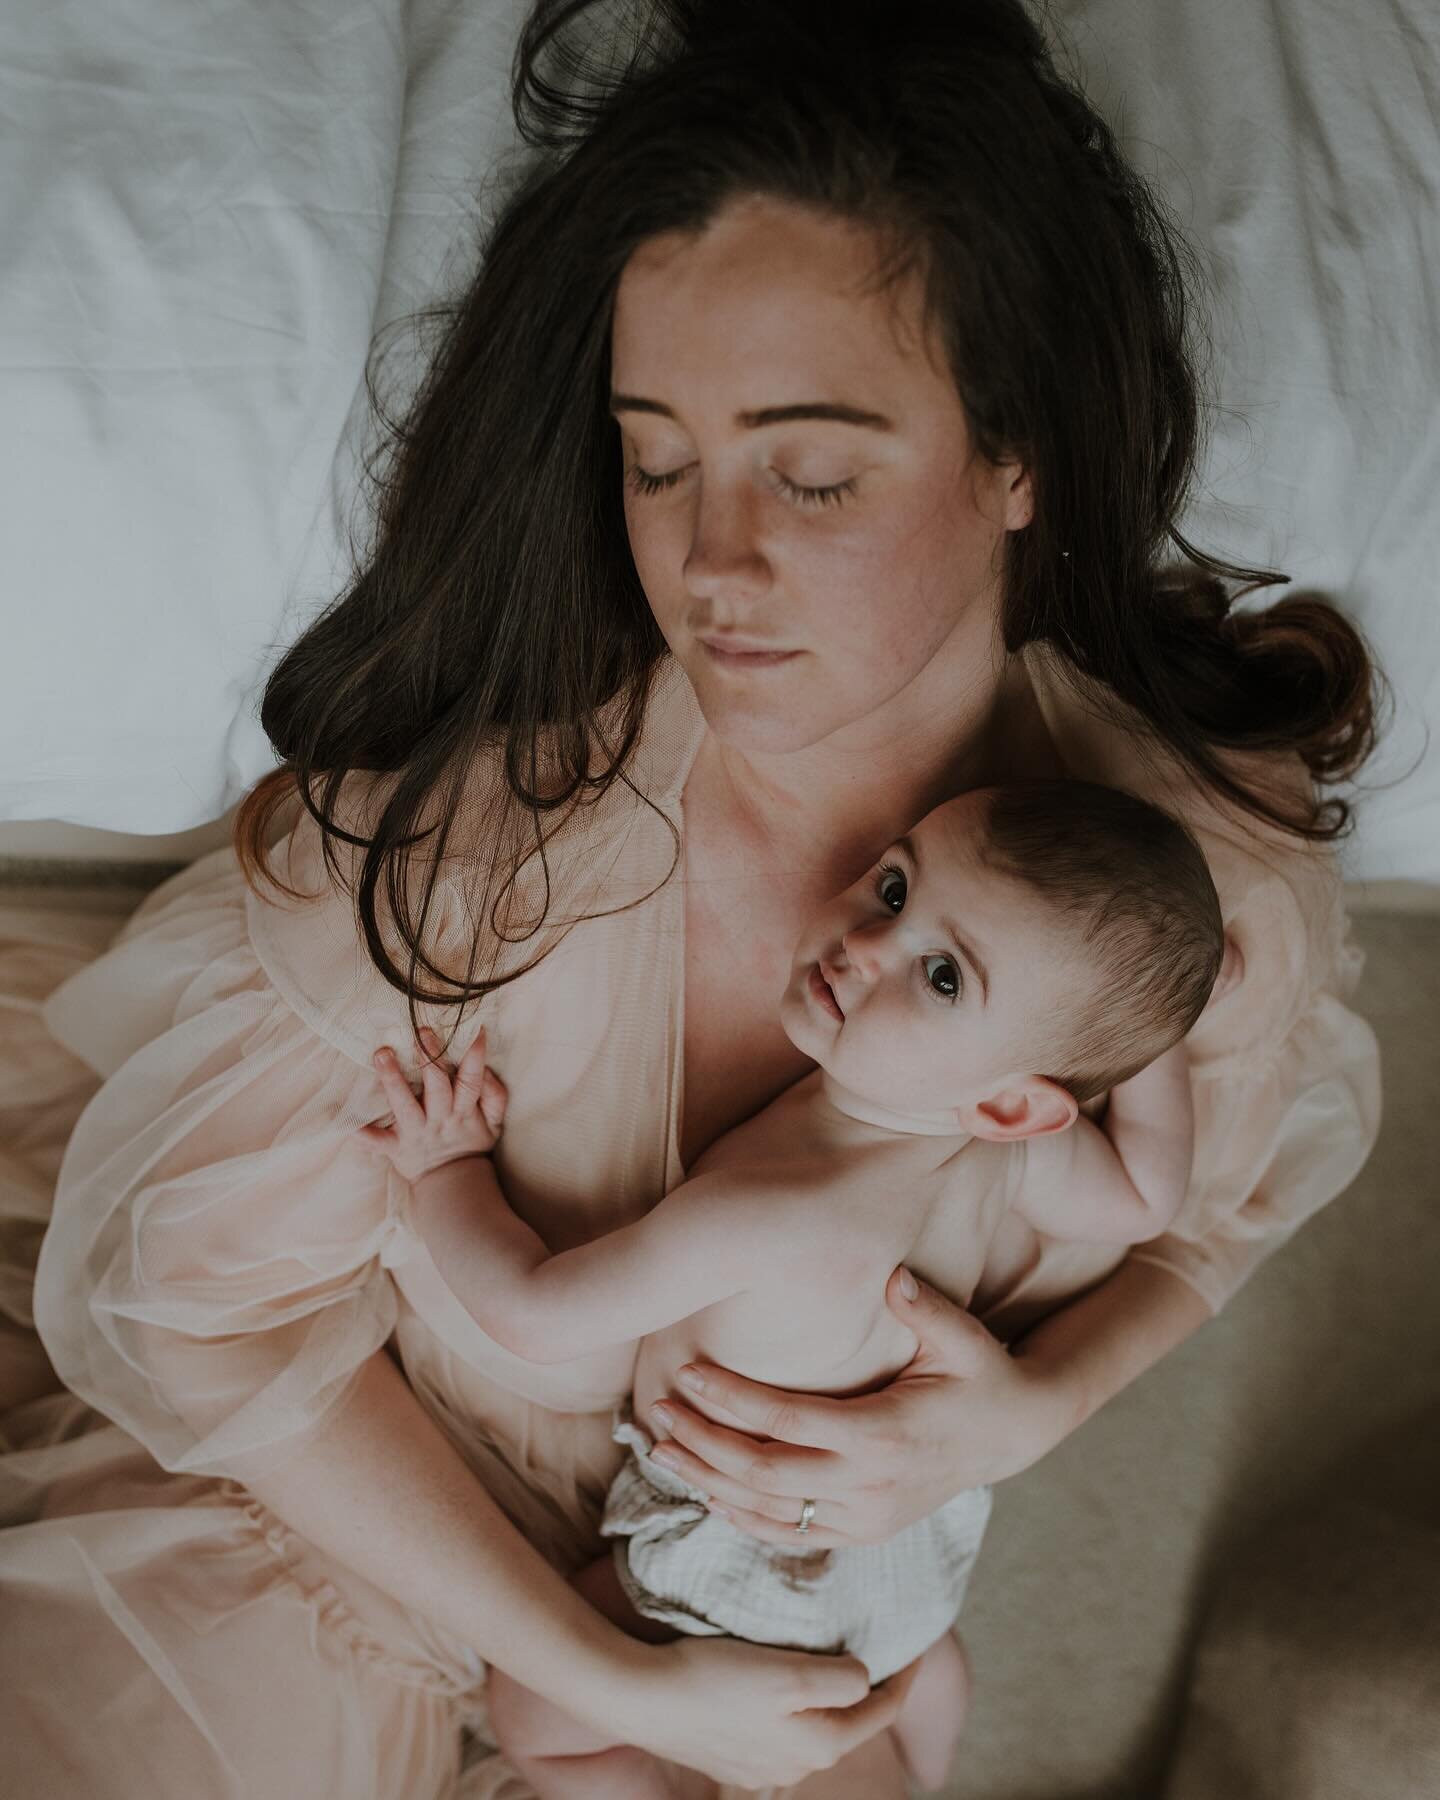 Breaking the radio silence here and hoping to encourage you to celebrate and photograph this chapter of your (and your little human&rsquo;s) life! ❤️

Make sure you have photos to look back on from your breastfeeding journey 🥰